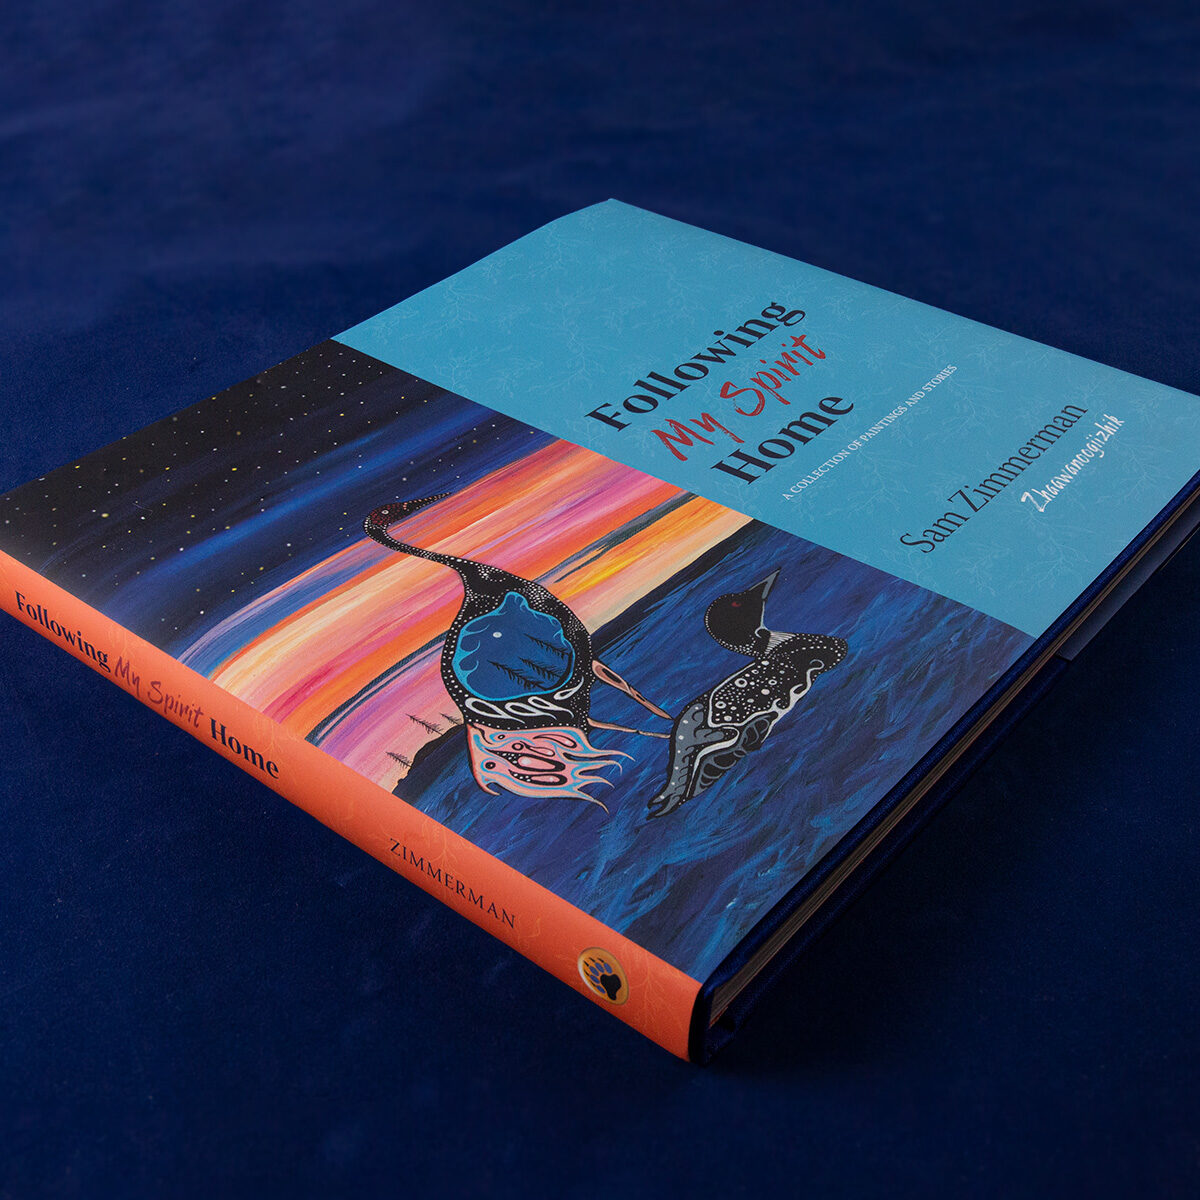 Front cover of book showing artist depiction of a crane and a loon, and orange spine on blue background